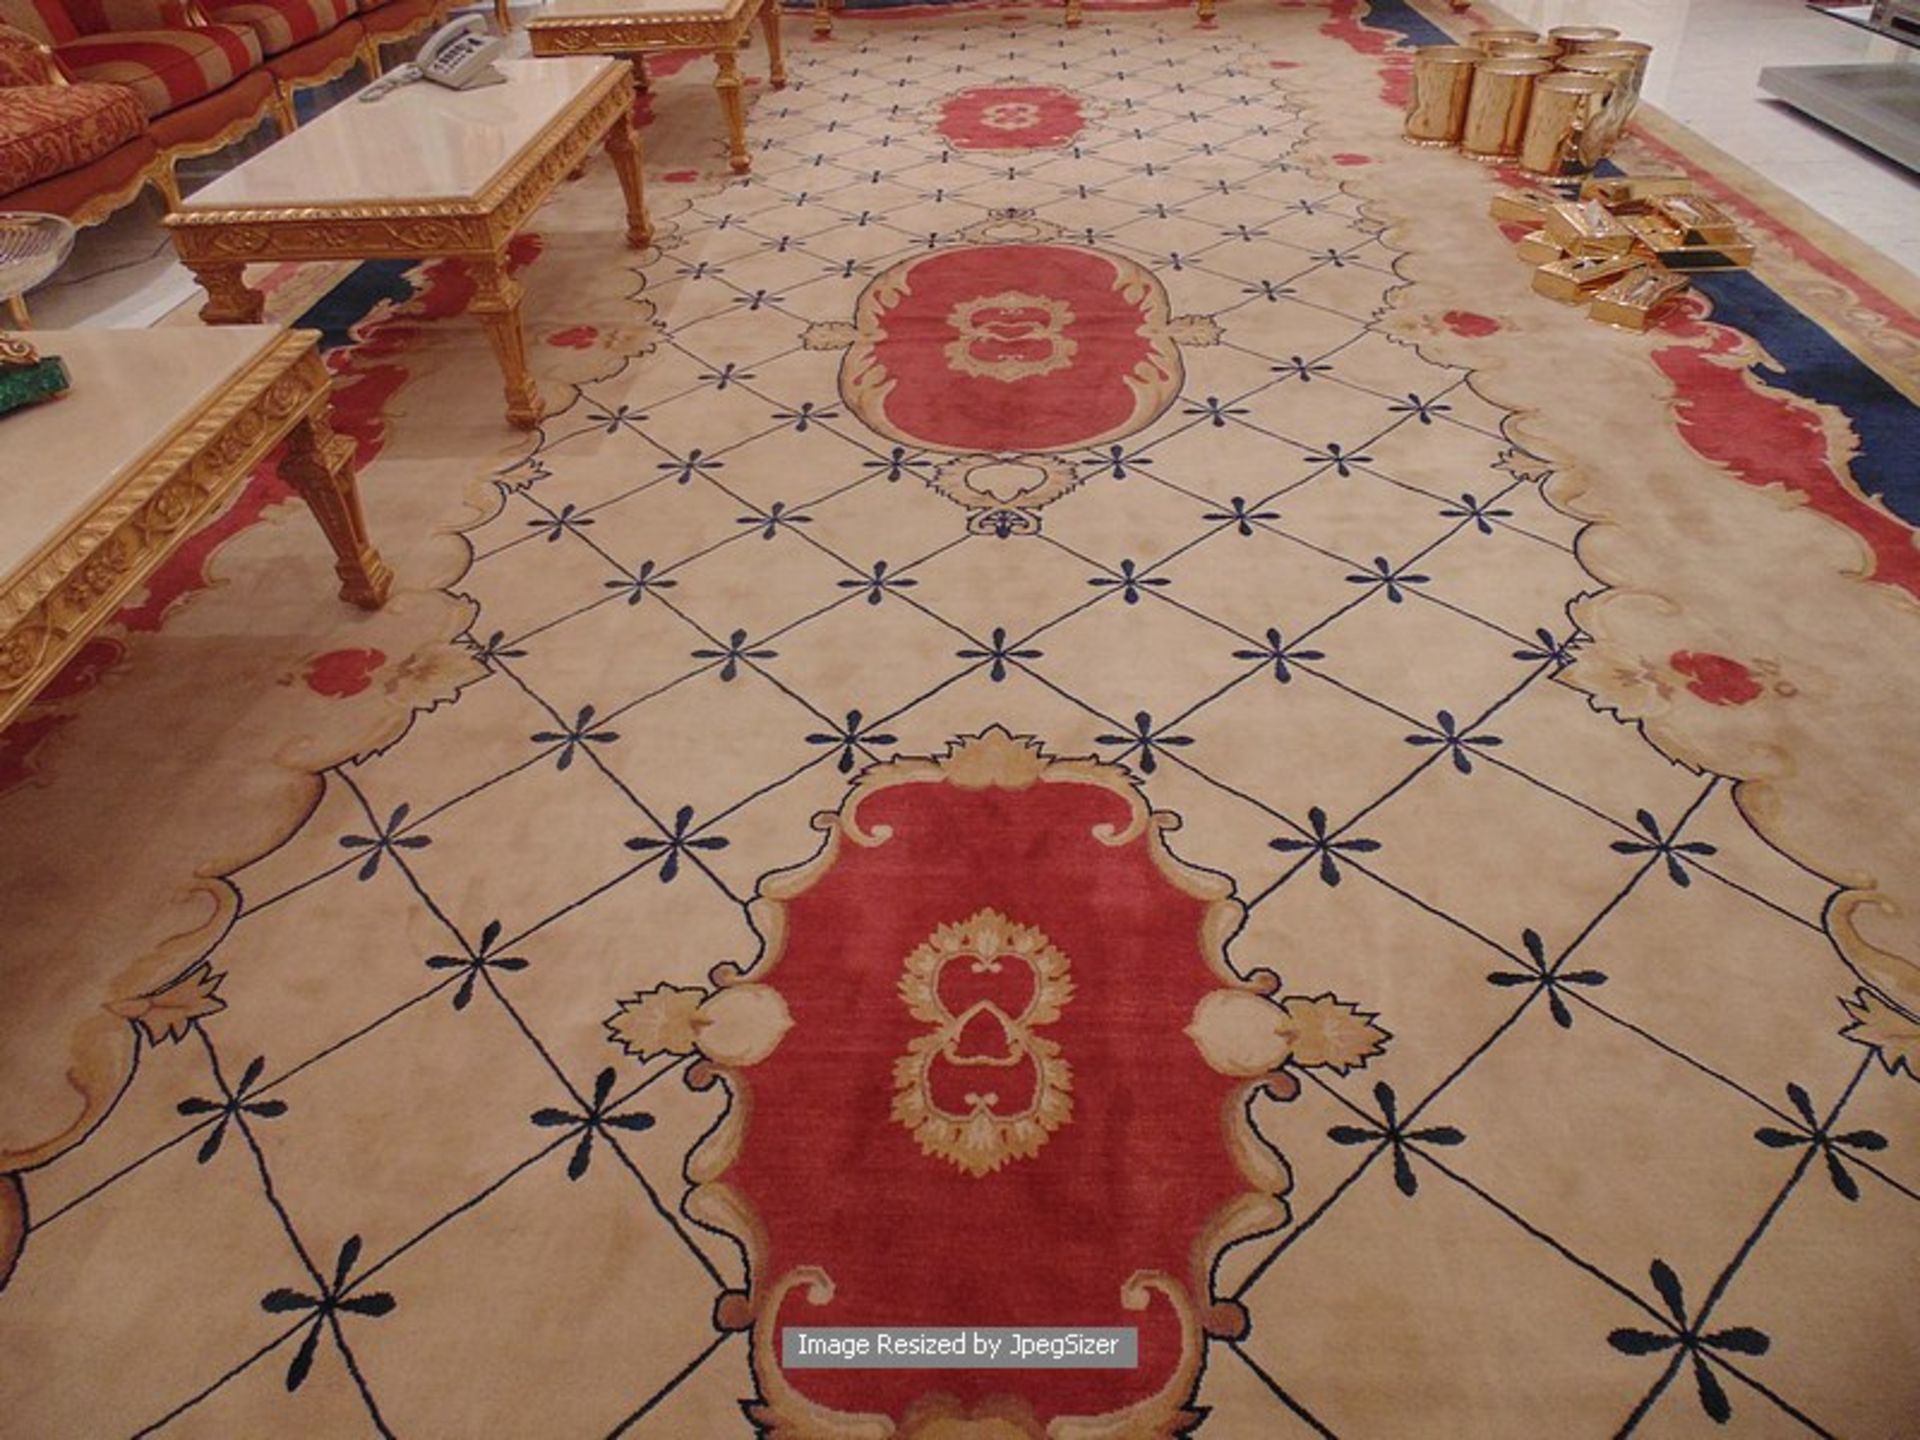 A sumptuous 100% pure new wool carpet 9.5mm x 4.4m cream field classic repeating pattern with